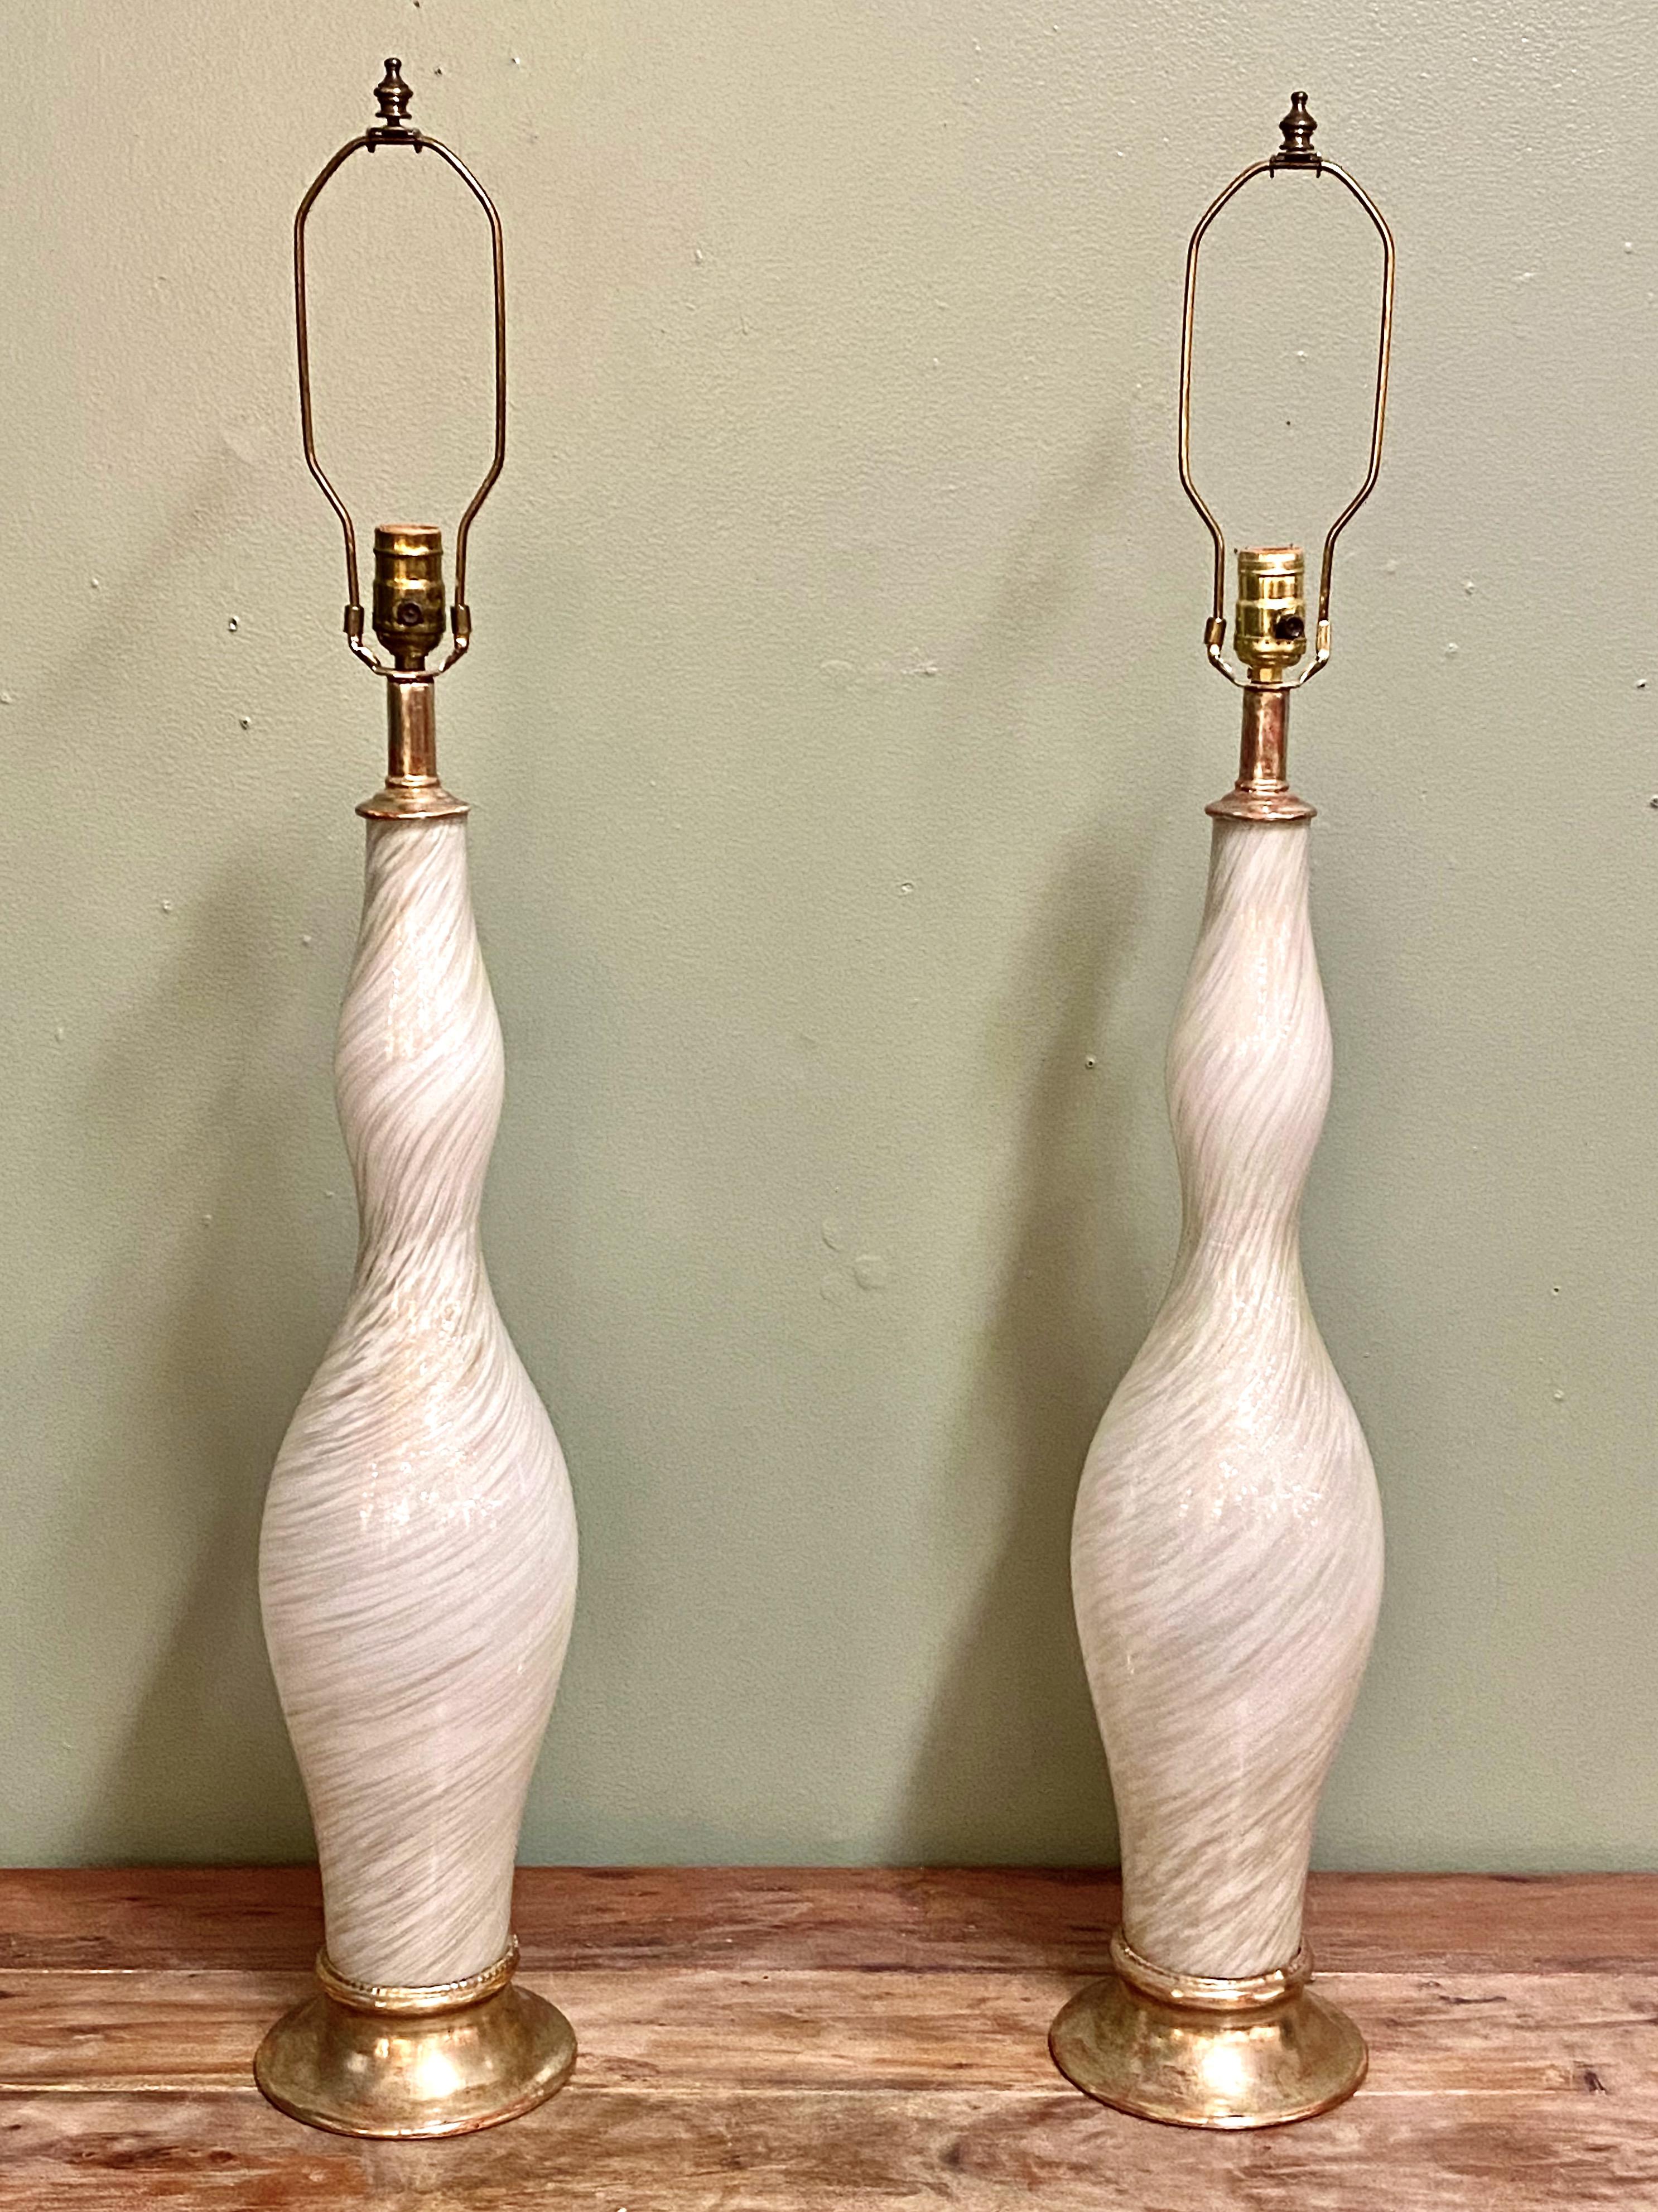 This is a stunning pair of mid-century Murano lamps that have been accented with gold leaf bases. The white swirled and gold powder-infused glass is in excellent condition and unusual in its height, measuring 29 inches to the base of the socket. The